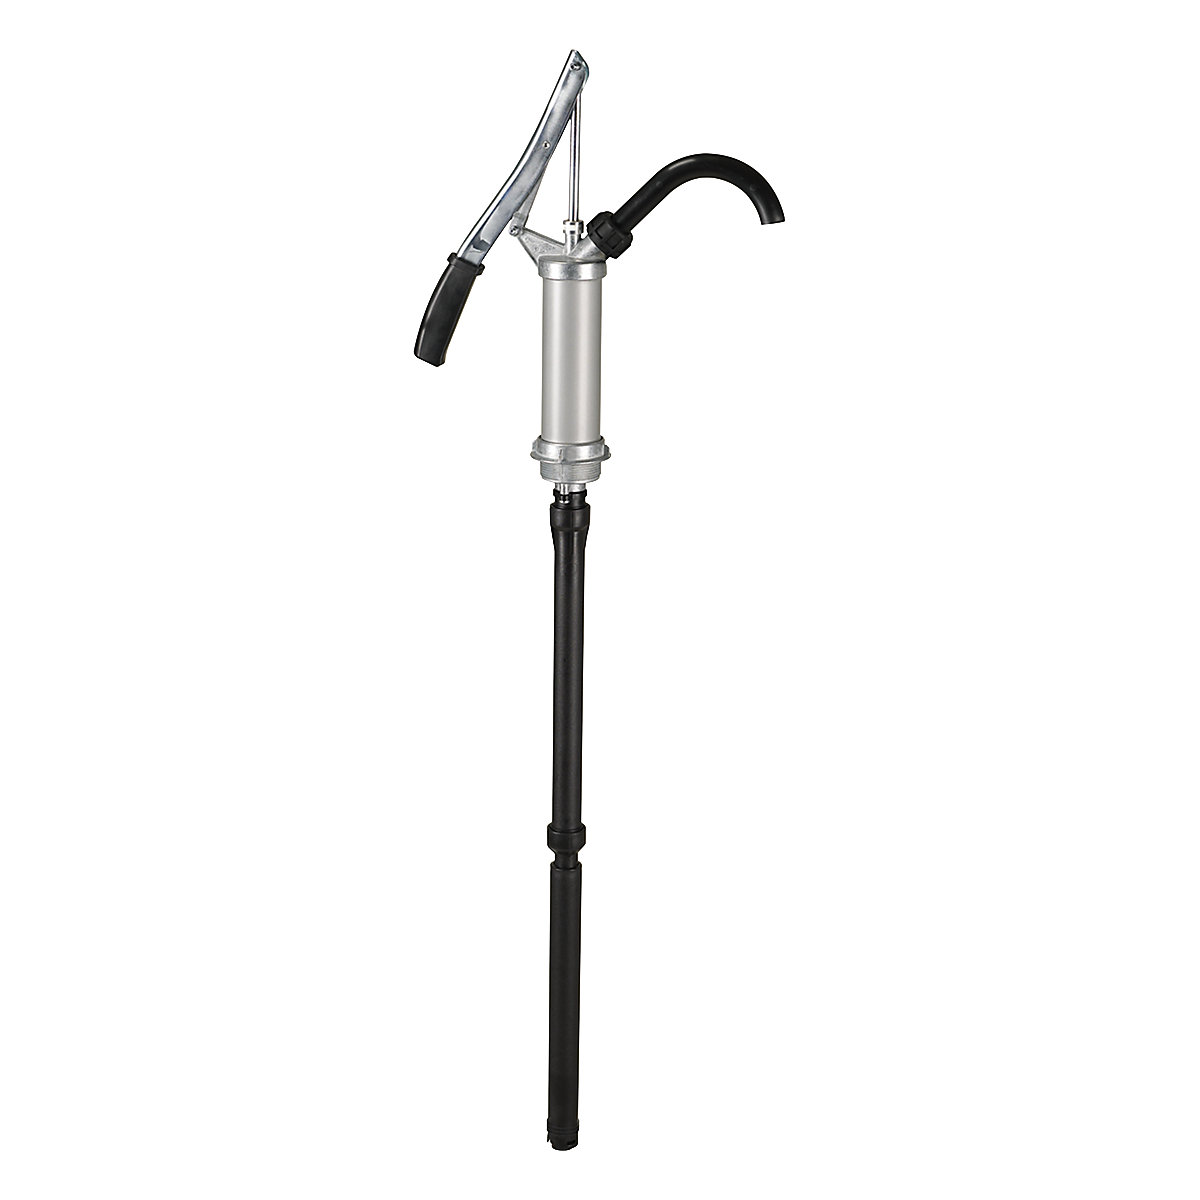 PRESSOL – Lever operated cylinder-type manual pump